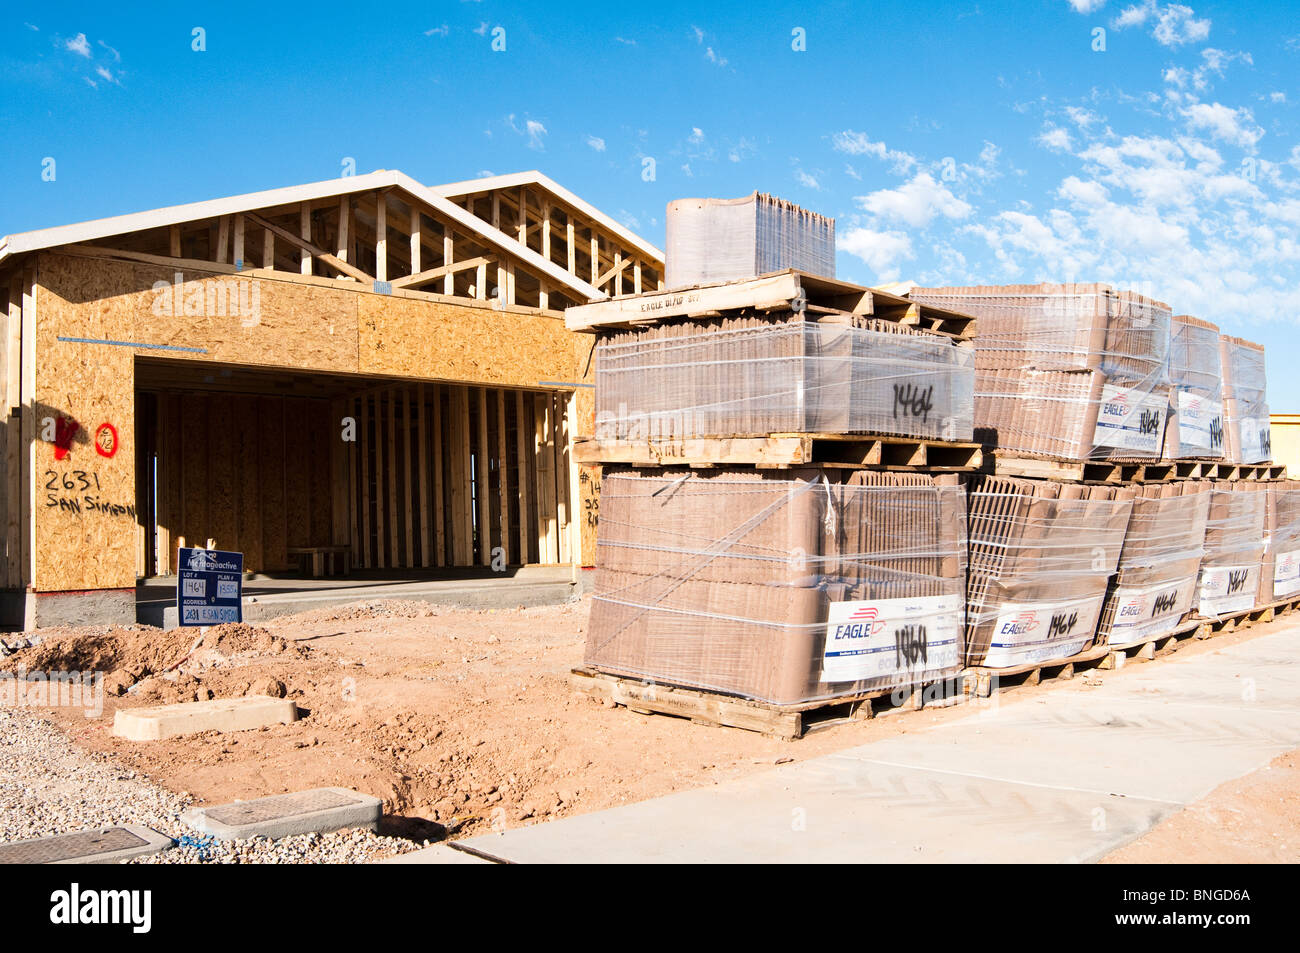 Roofing tiles are stacked on the construction site for a new wood frame house begin built in Arizona. Stock Photo